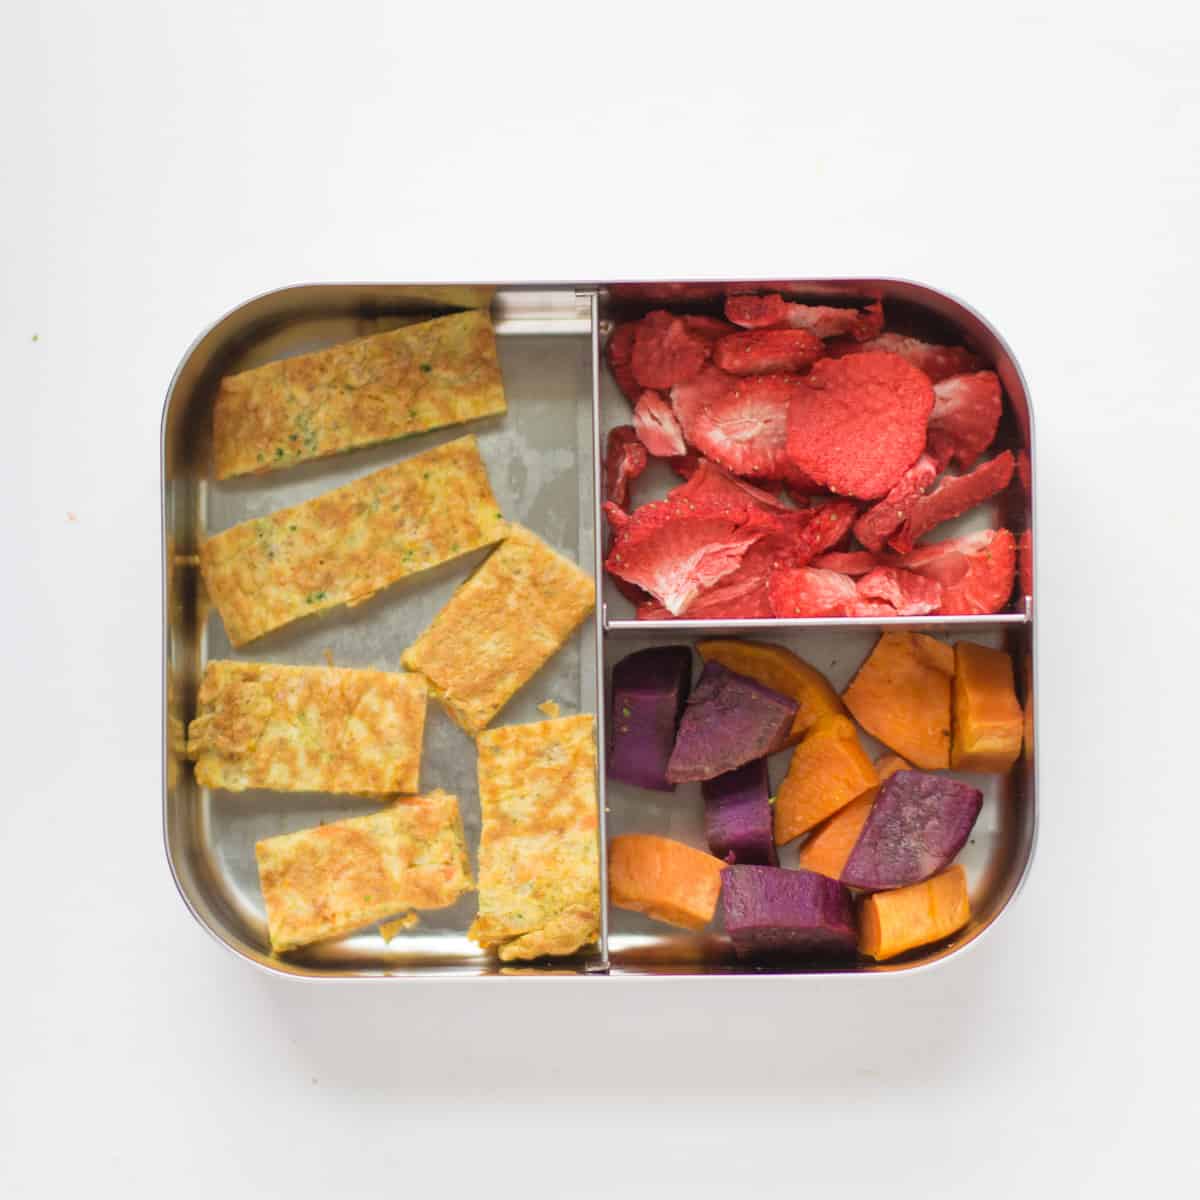 Vegetable omelette strips, freeze dried strawberries, and orange and purple sweet potatoes.